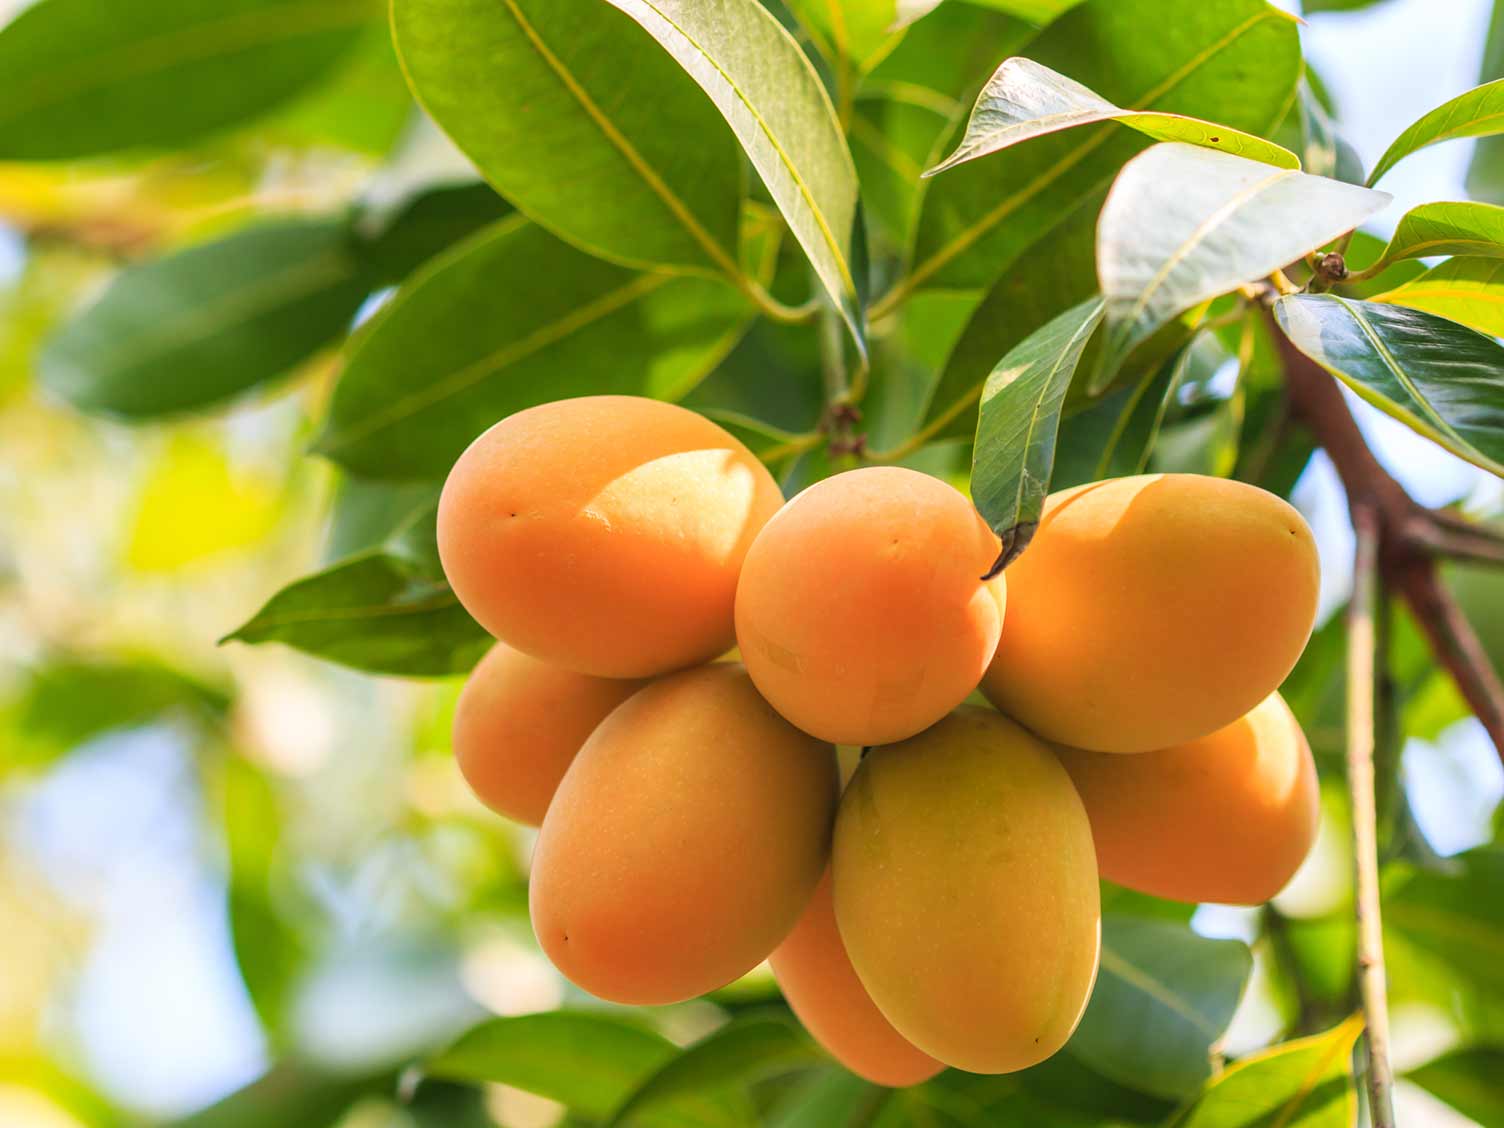  How to grow and care for mango trees